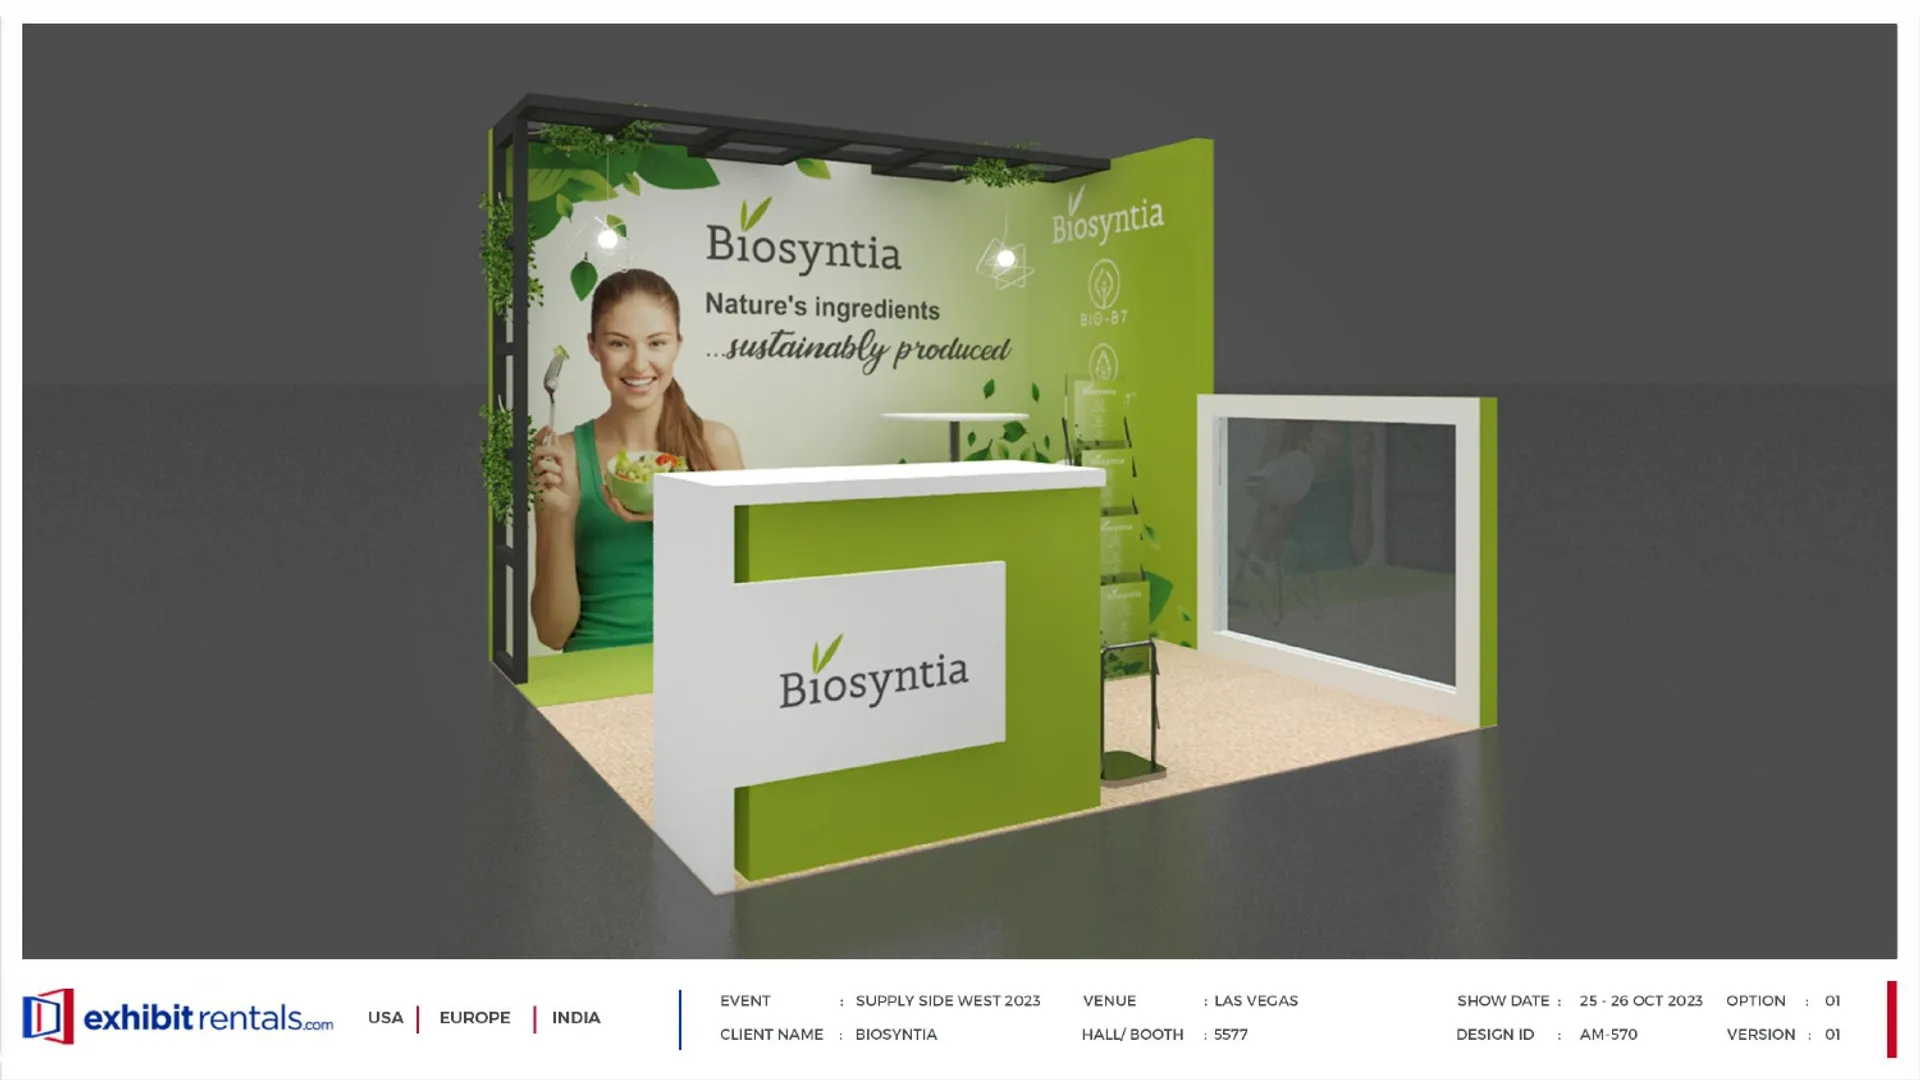 booth-design-projects/Exhibit-Rentals/2024-04-18-10x10-PERIMETER-Project-91/1.1_Biosyntia_Supply Side West 2023_ER Design presentation-13_page-0001-84ive.jpg